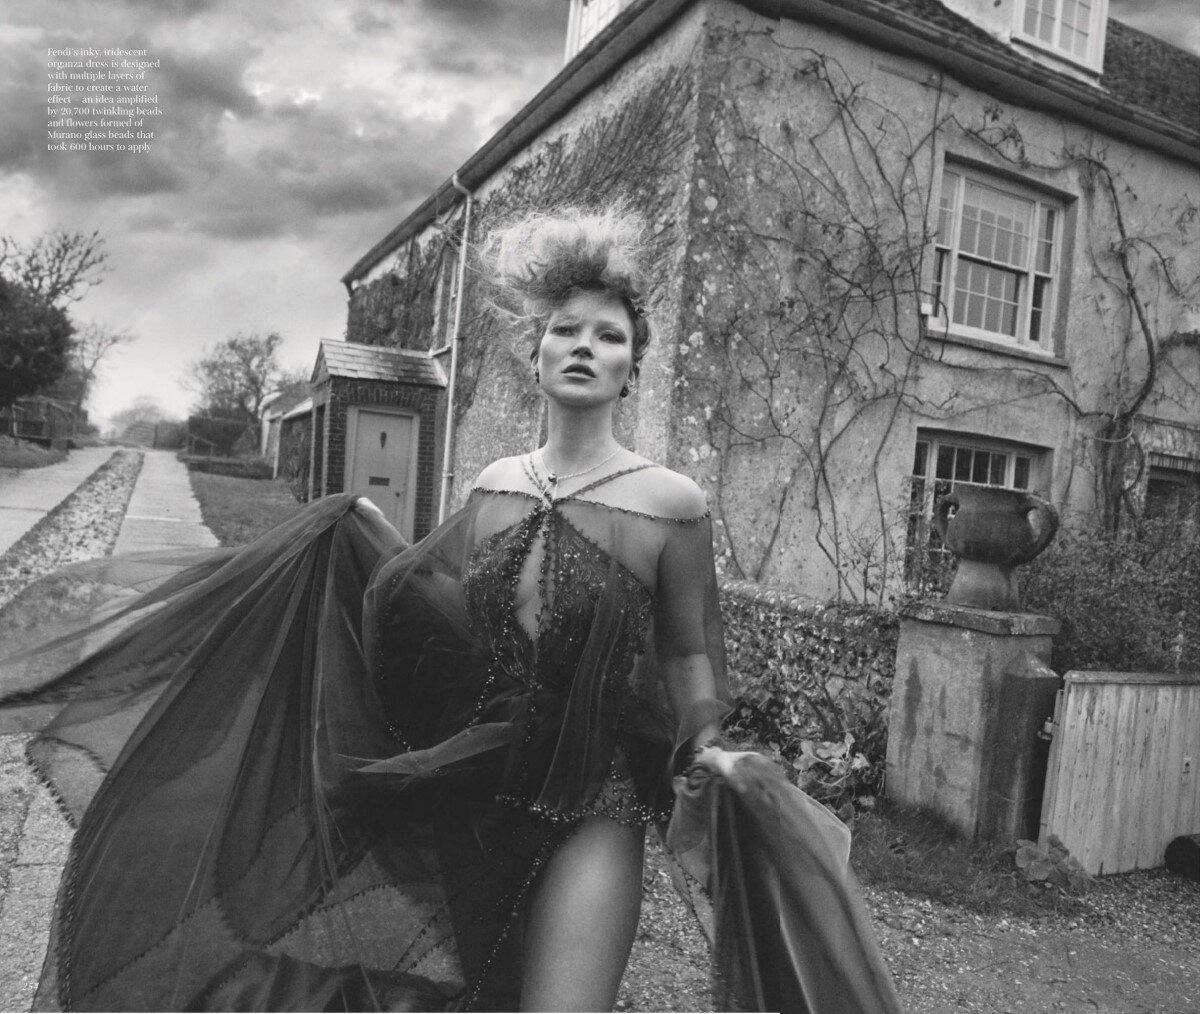 Kate Moss in Fendi Couture British Vogue March 2021 (1).jpg